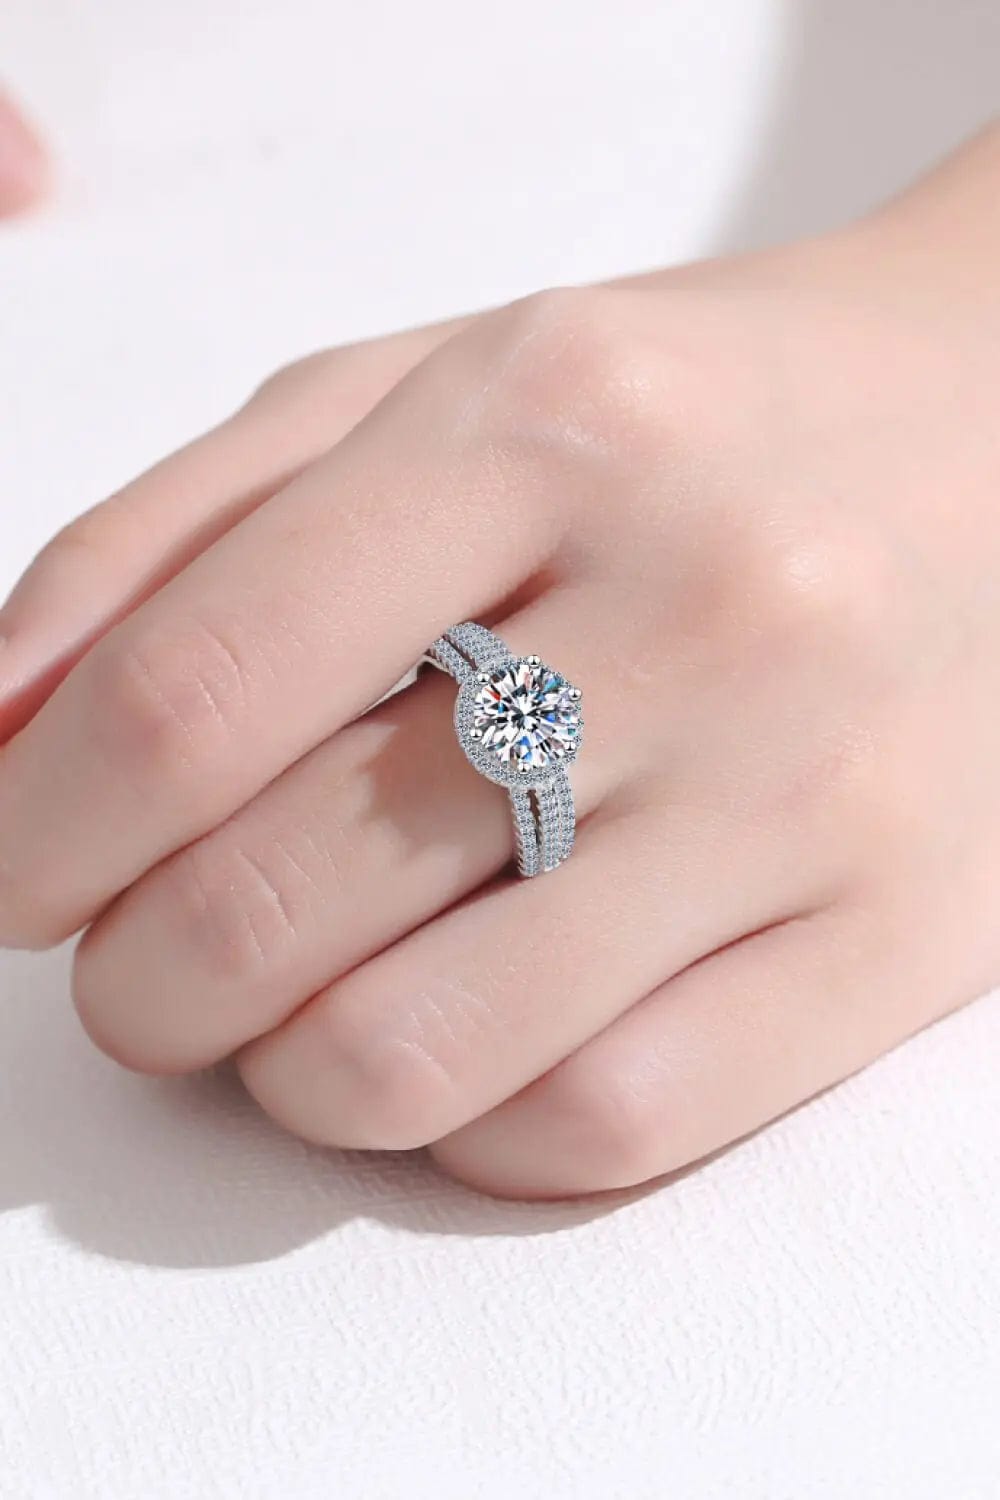 Sterling Silver Moissanite Ring - CLASSY CLOSET BOUTIQUESterling Silver Moissanite Ringjewelry101300231003255101300231003255Silver4